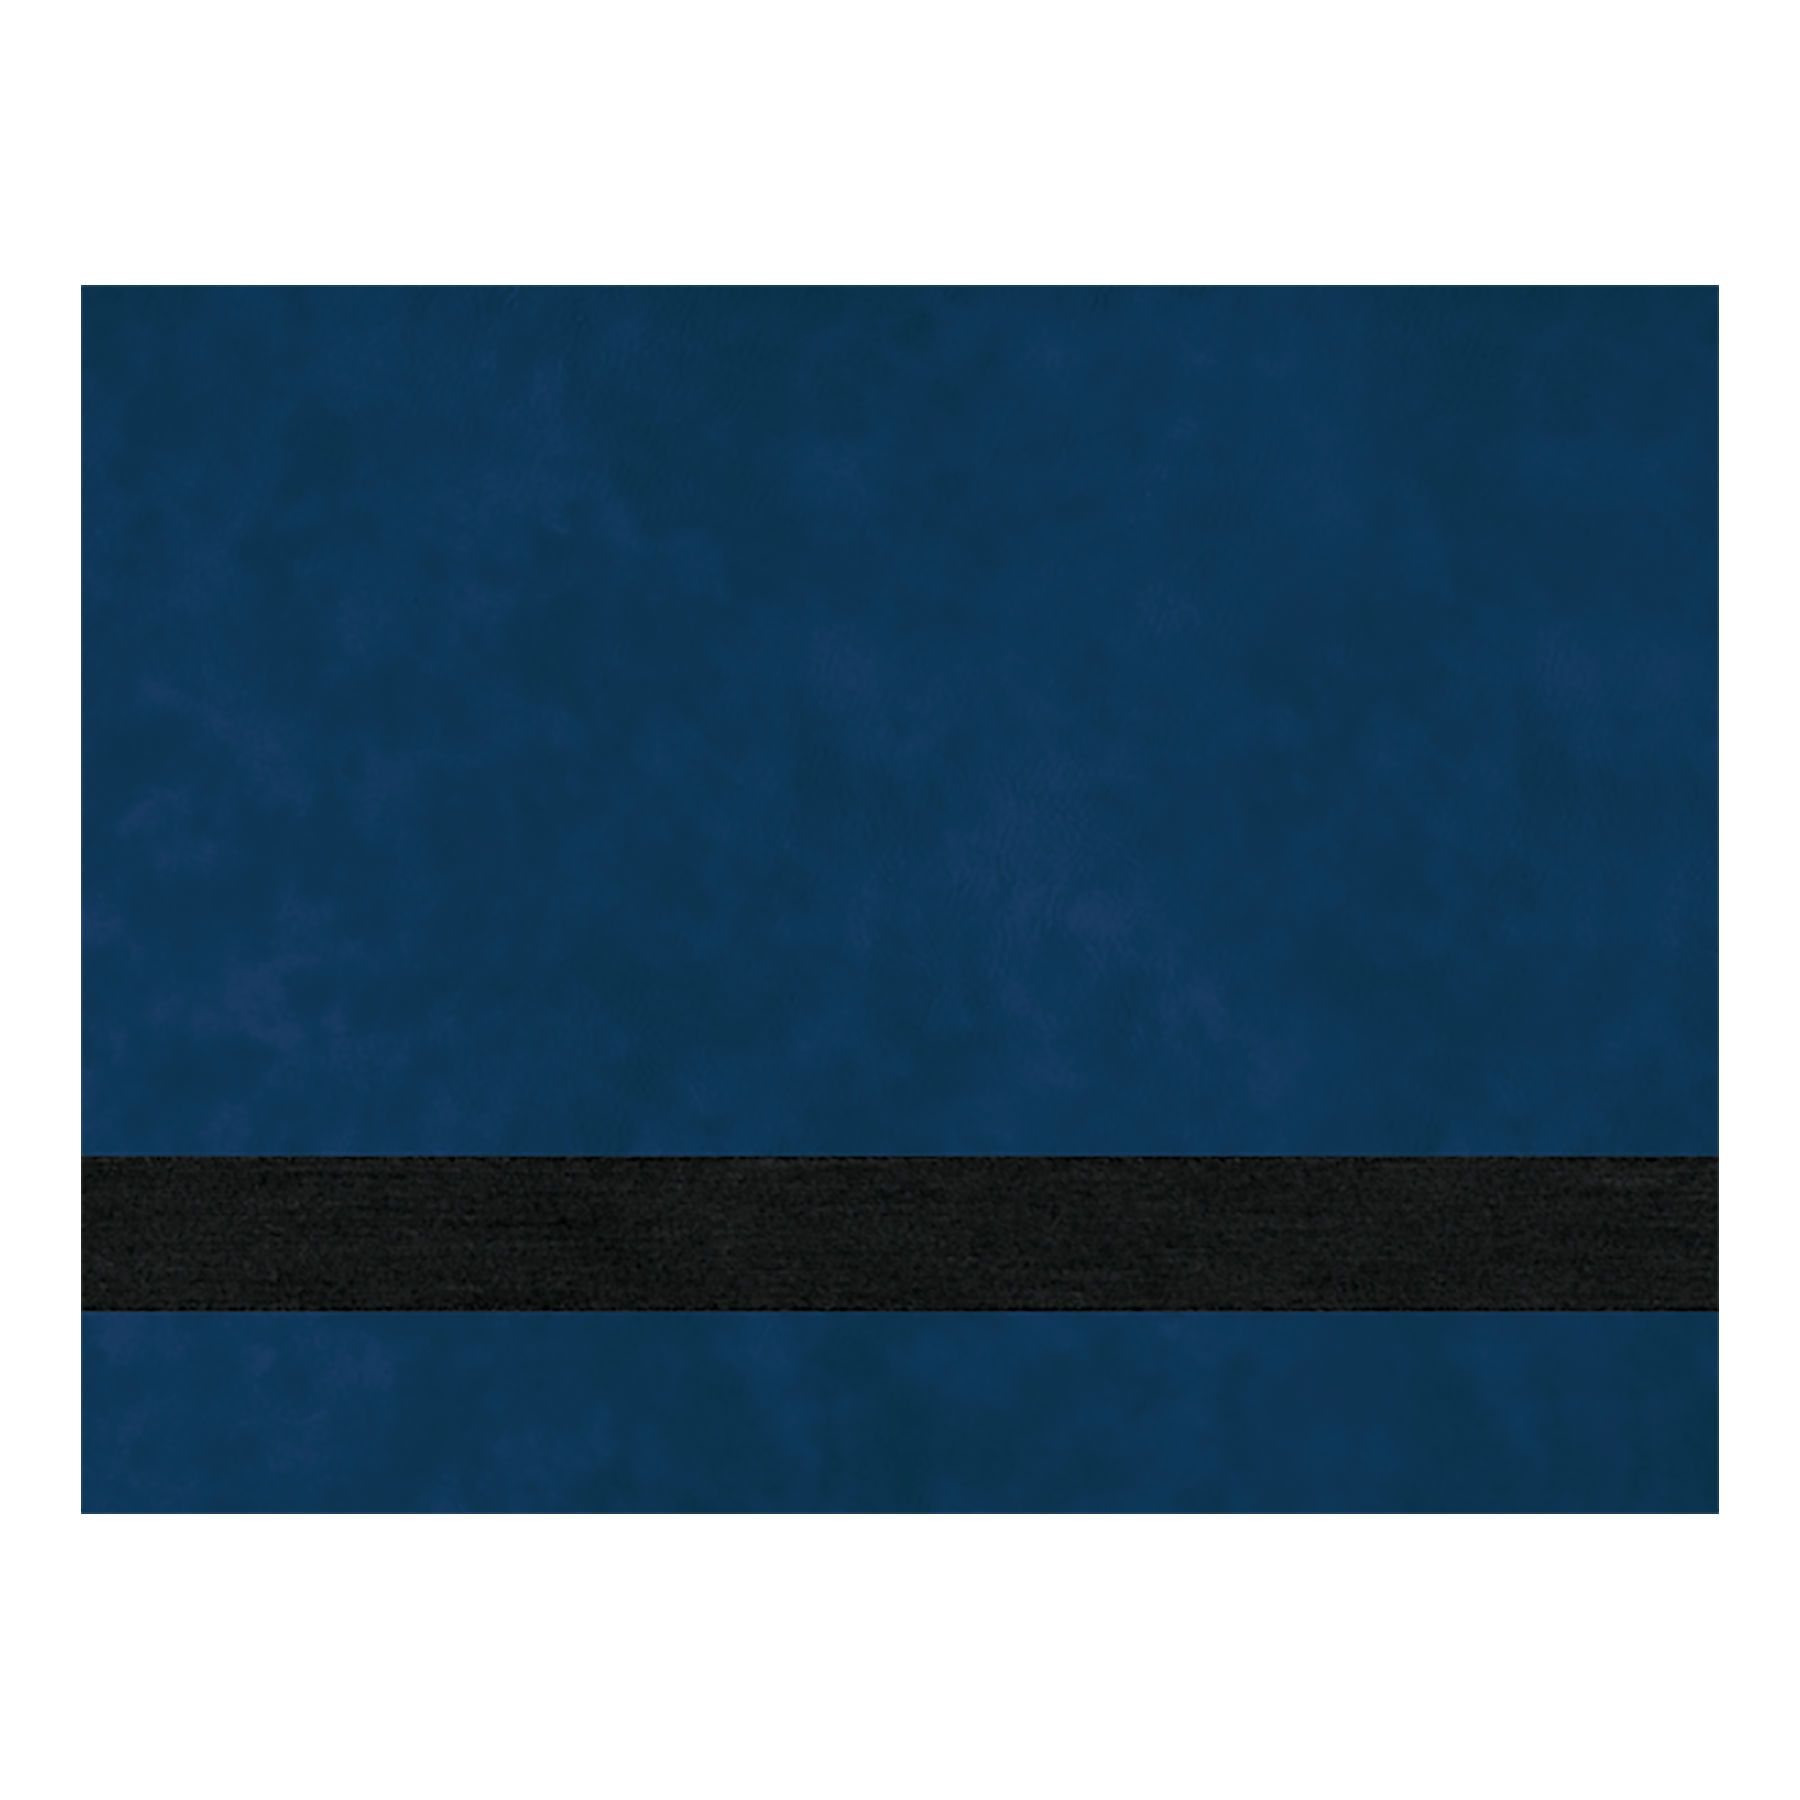 PRE-ORDER! Full Size Laserable Leatherette Sheet Stock, Rayjet Laser Engravers (Available Jan. 2022) Engraving Supplies Craftworks NW R400 (40" x 24") Blue/Black 